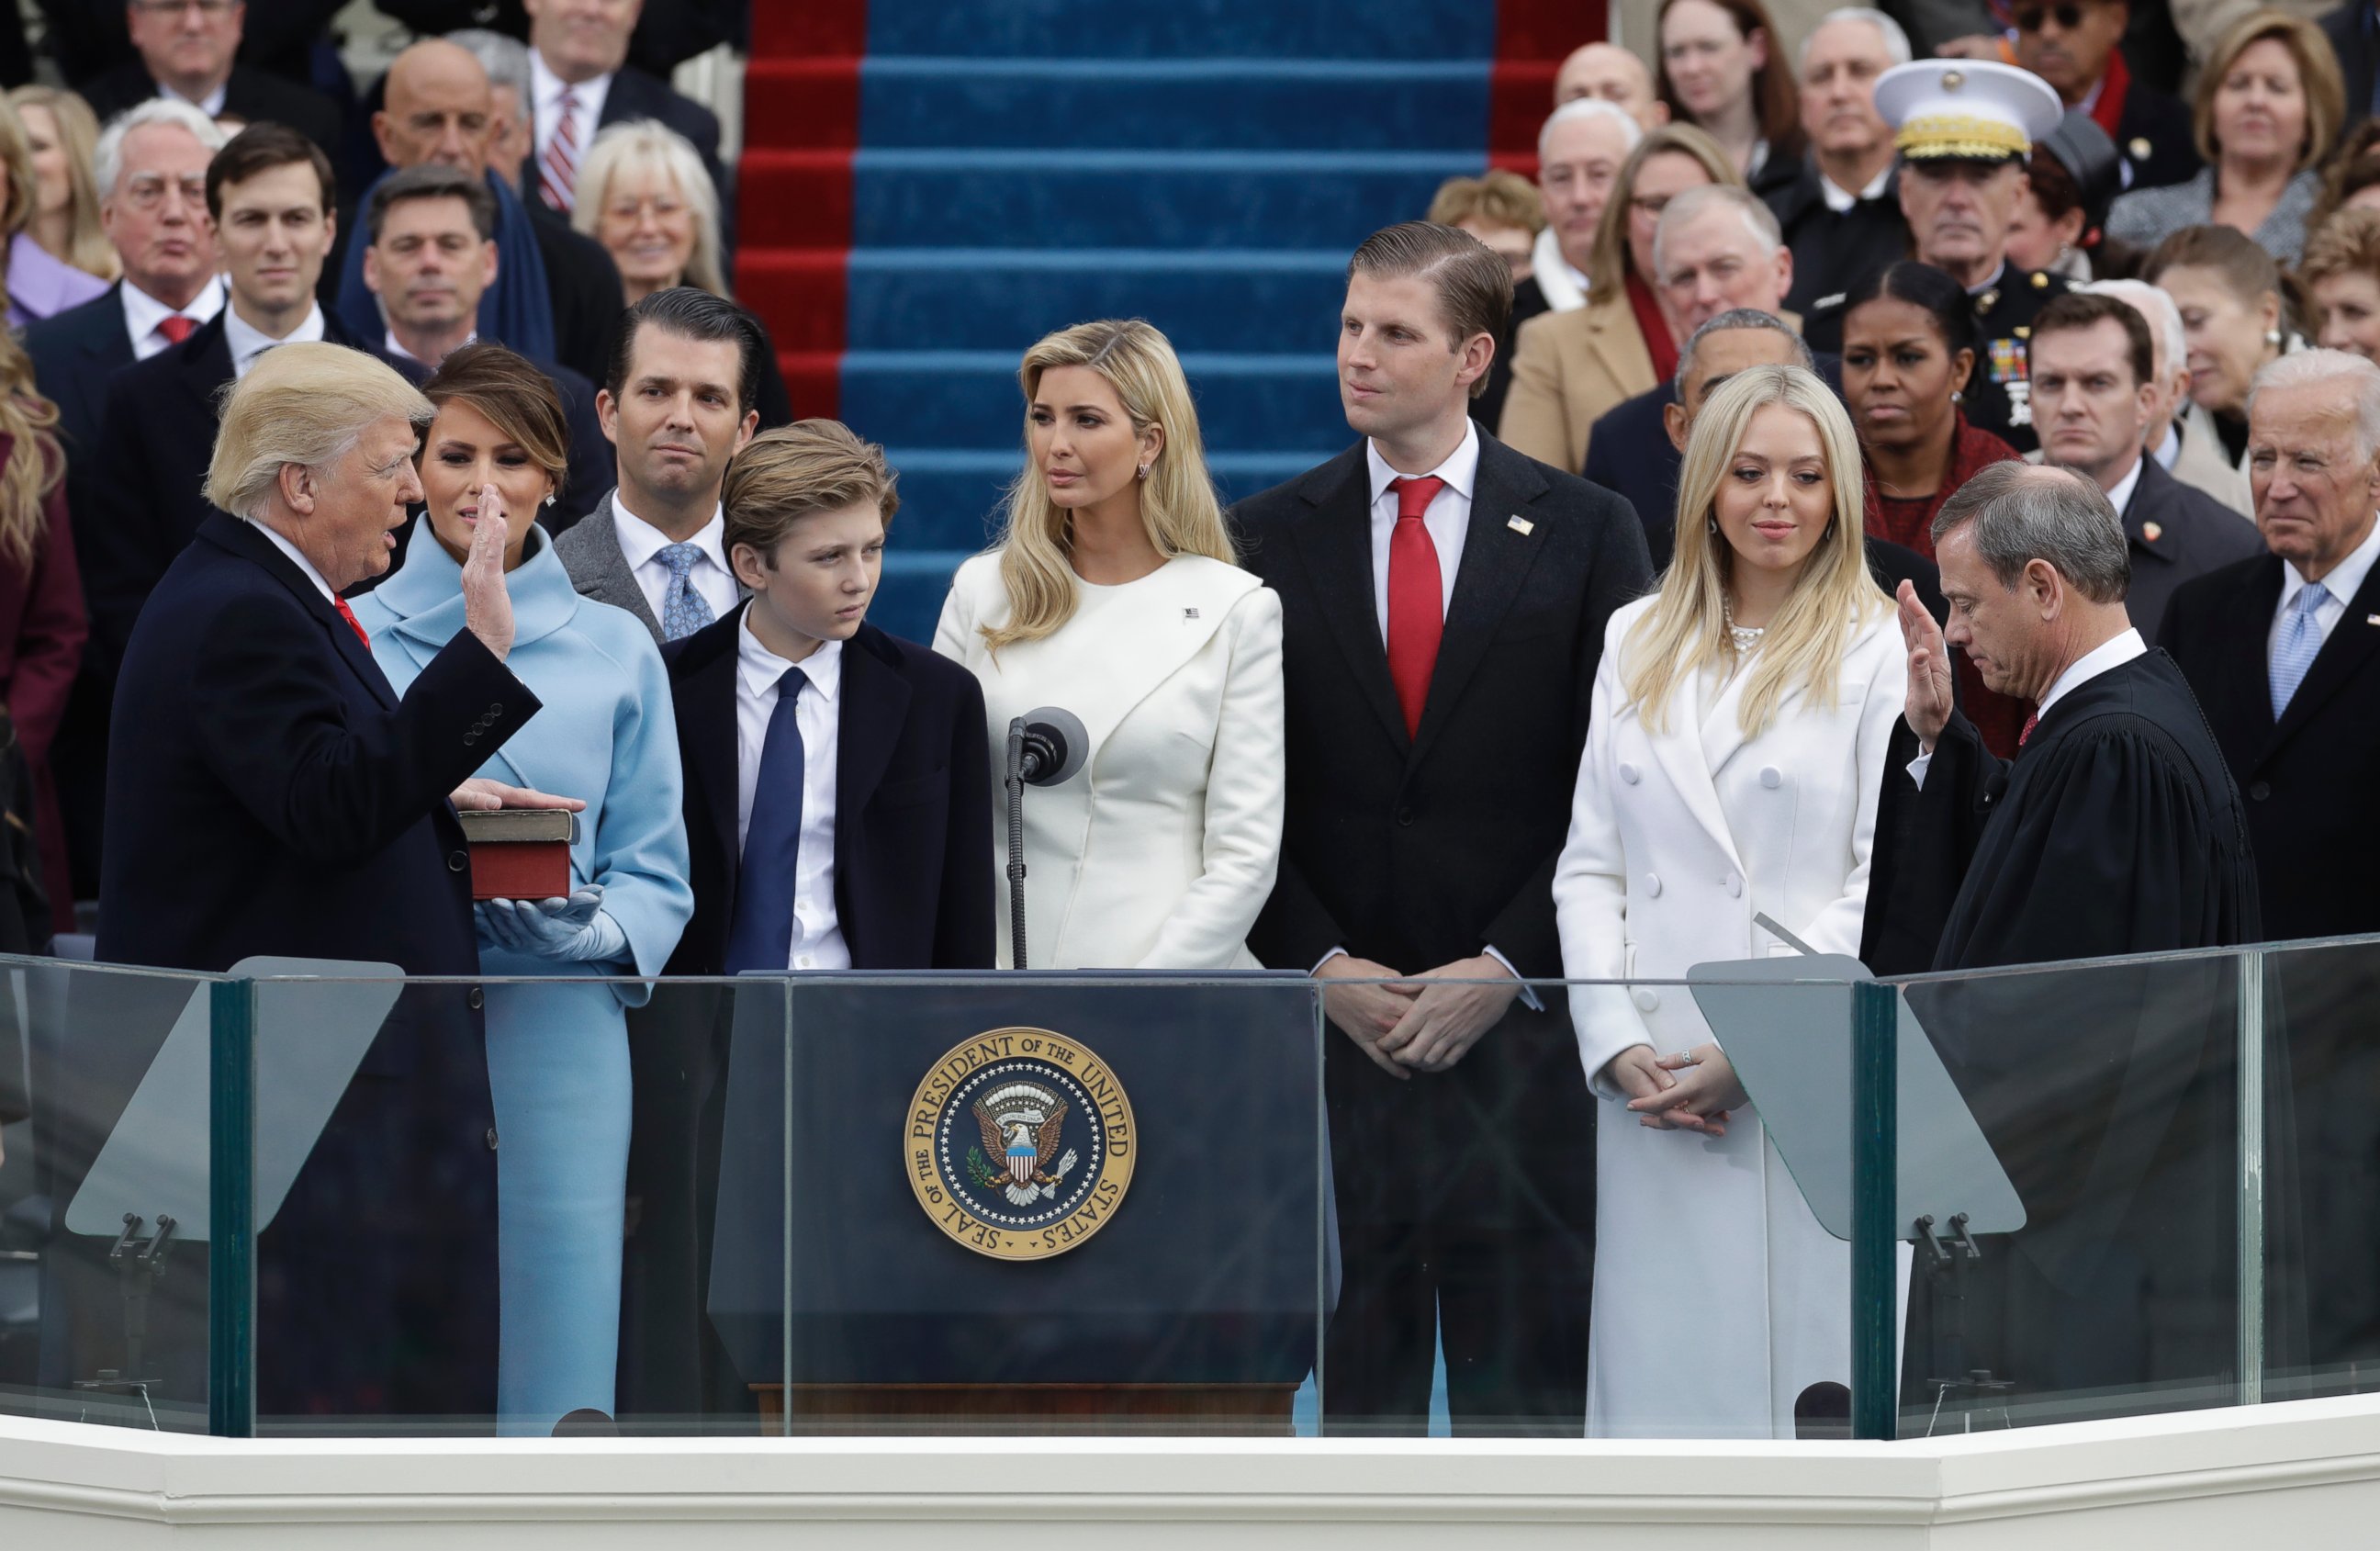 PHOTO: Donald Trump is sworn in as the 45th president of the United States by Chief Justice John Roberts as Melania Trump and his family looks on during the 58th Presidential Inauguration at the U.S. Capitol in Washington, Jan. 20, 2017.